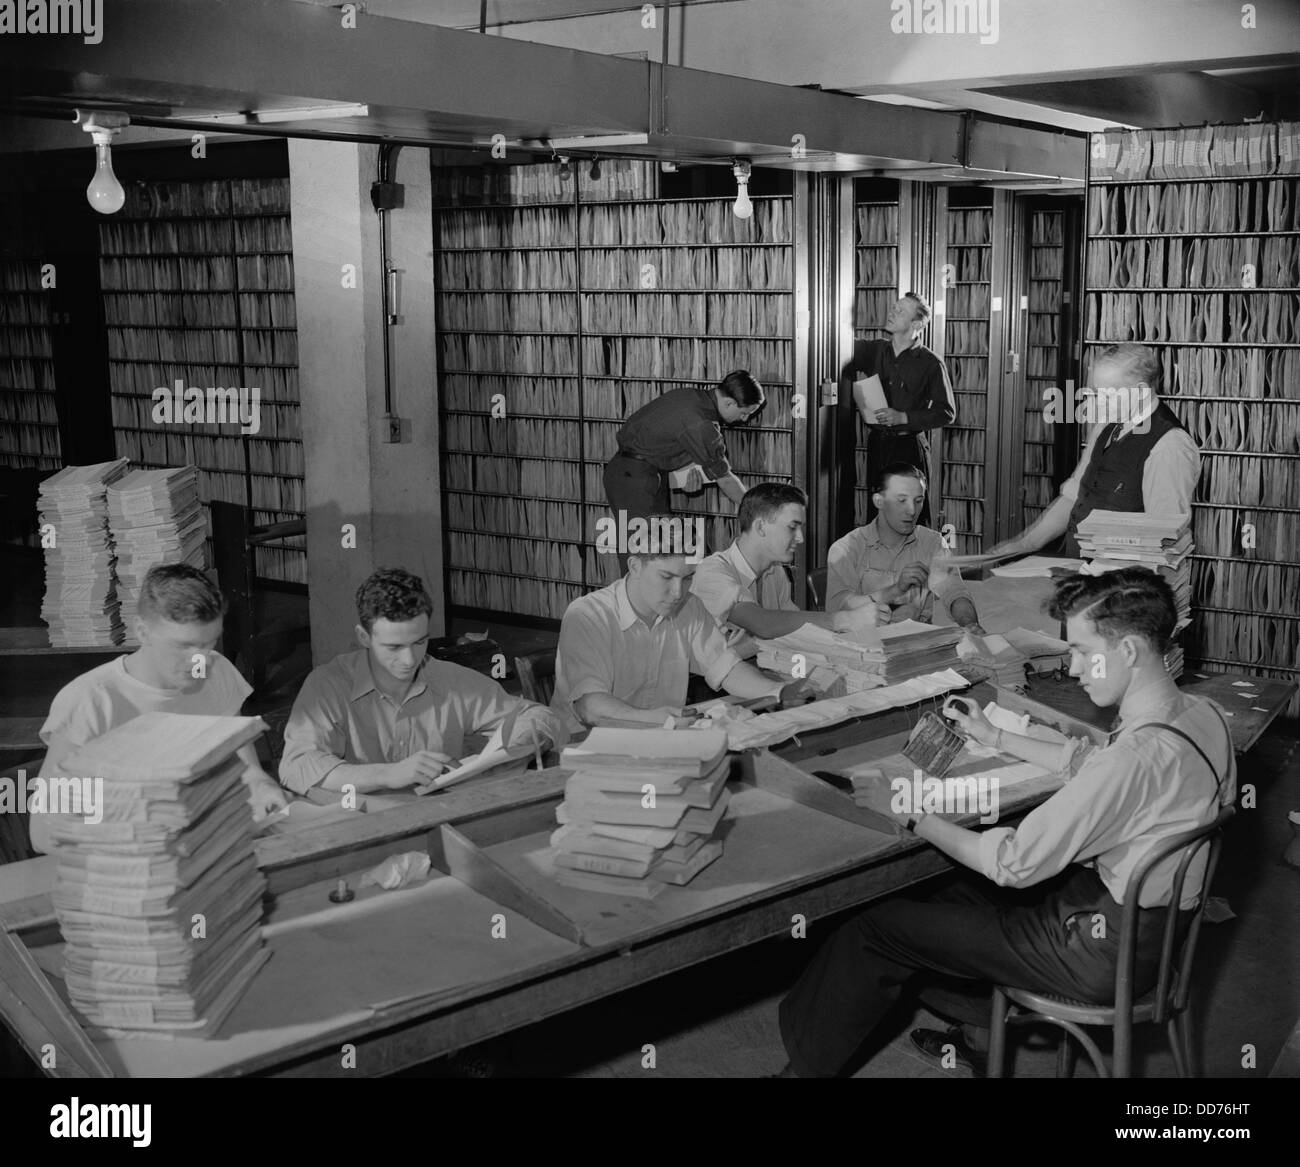 Federal workers in the patent office file room, where patents are kept on file for public use. Feb. 29, 1940. (BSLOC 2013 8 176) Stock Photo